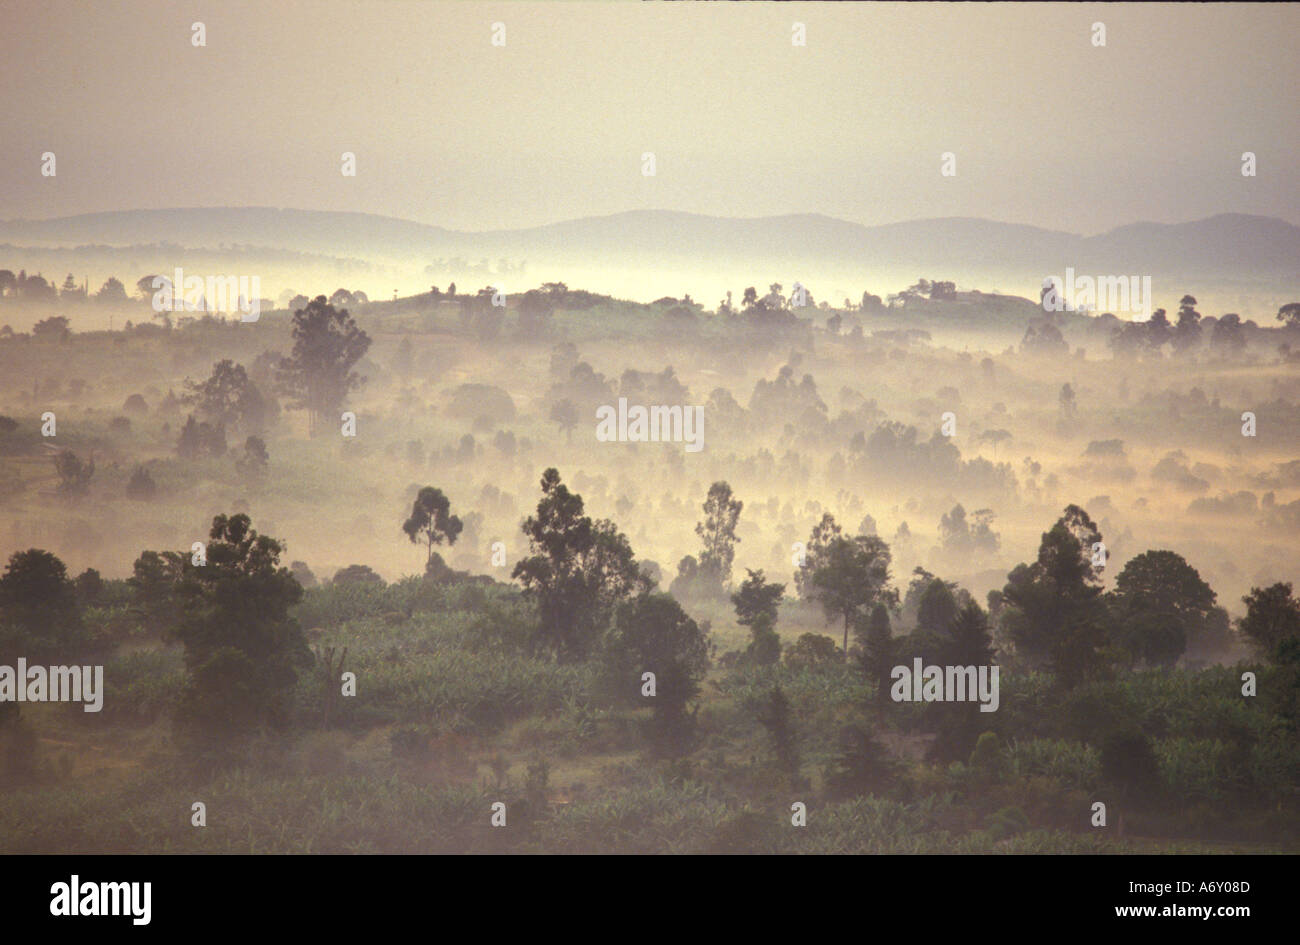 Spectacular scenic vista to distant mountains of golden eerie mist rising over Toro game park at dawn in Uganda Stock Photo